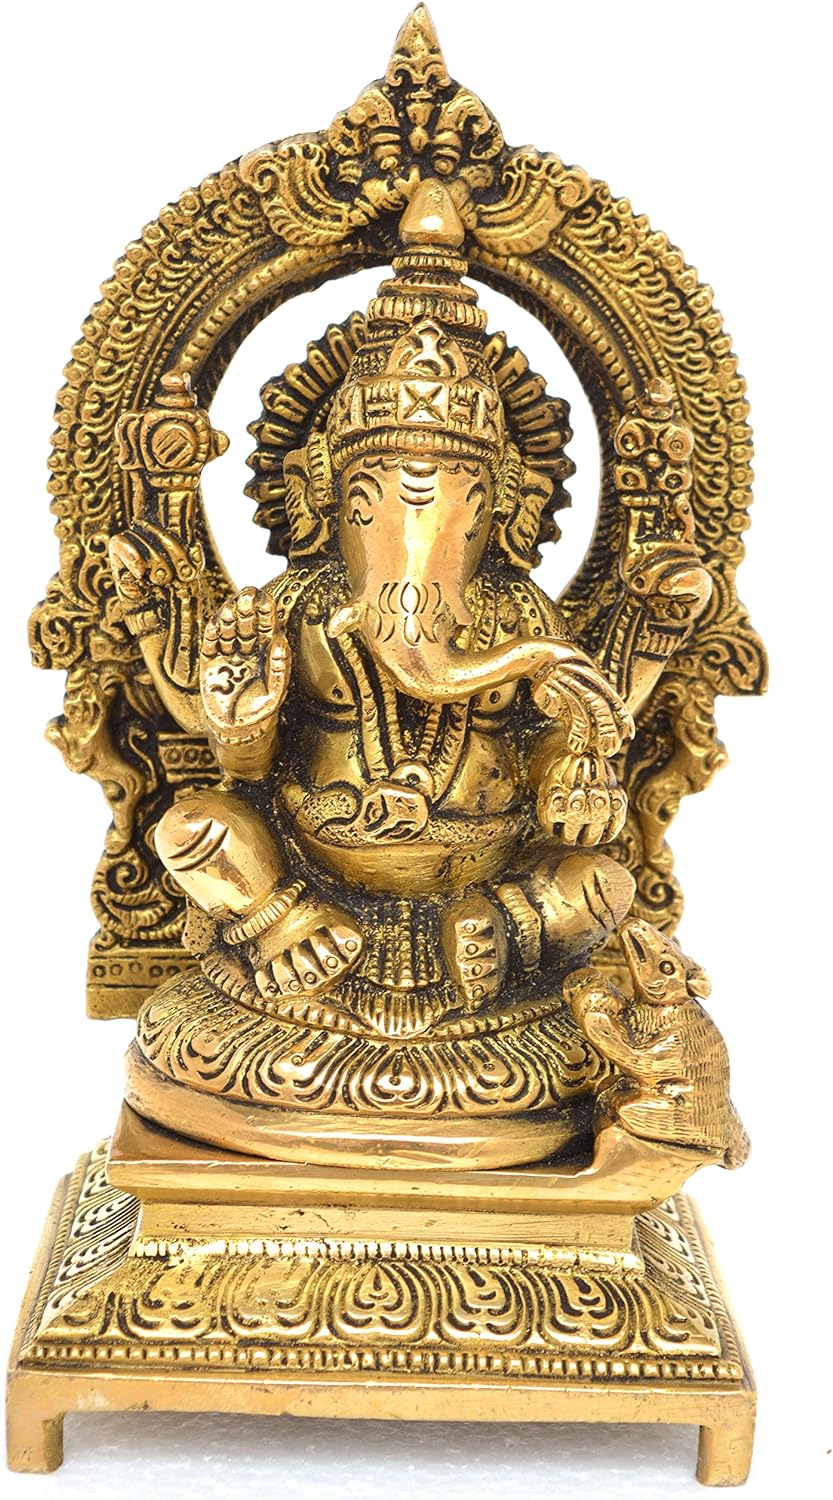 Aakrati Lord Ganesha Sitting Statue On A Throne Made of Brass - Best Religious Gift